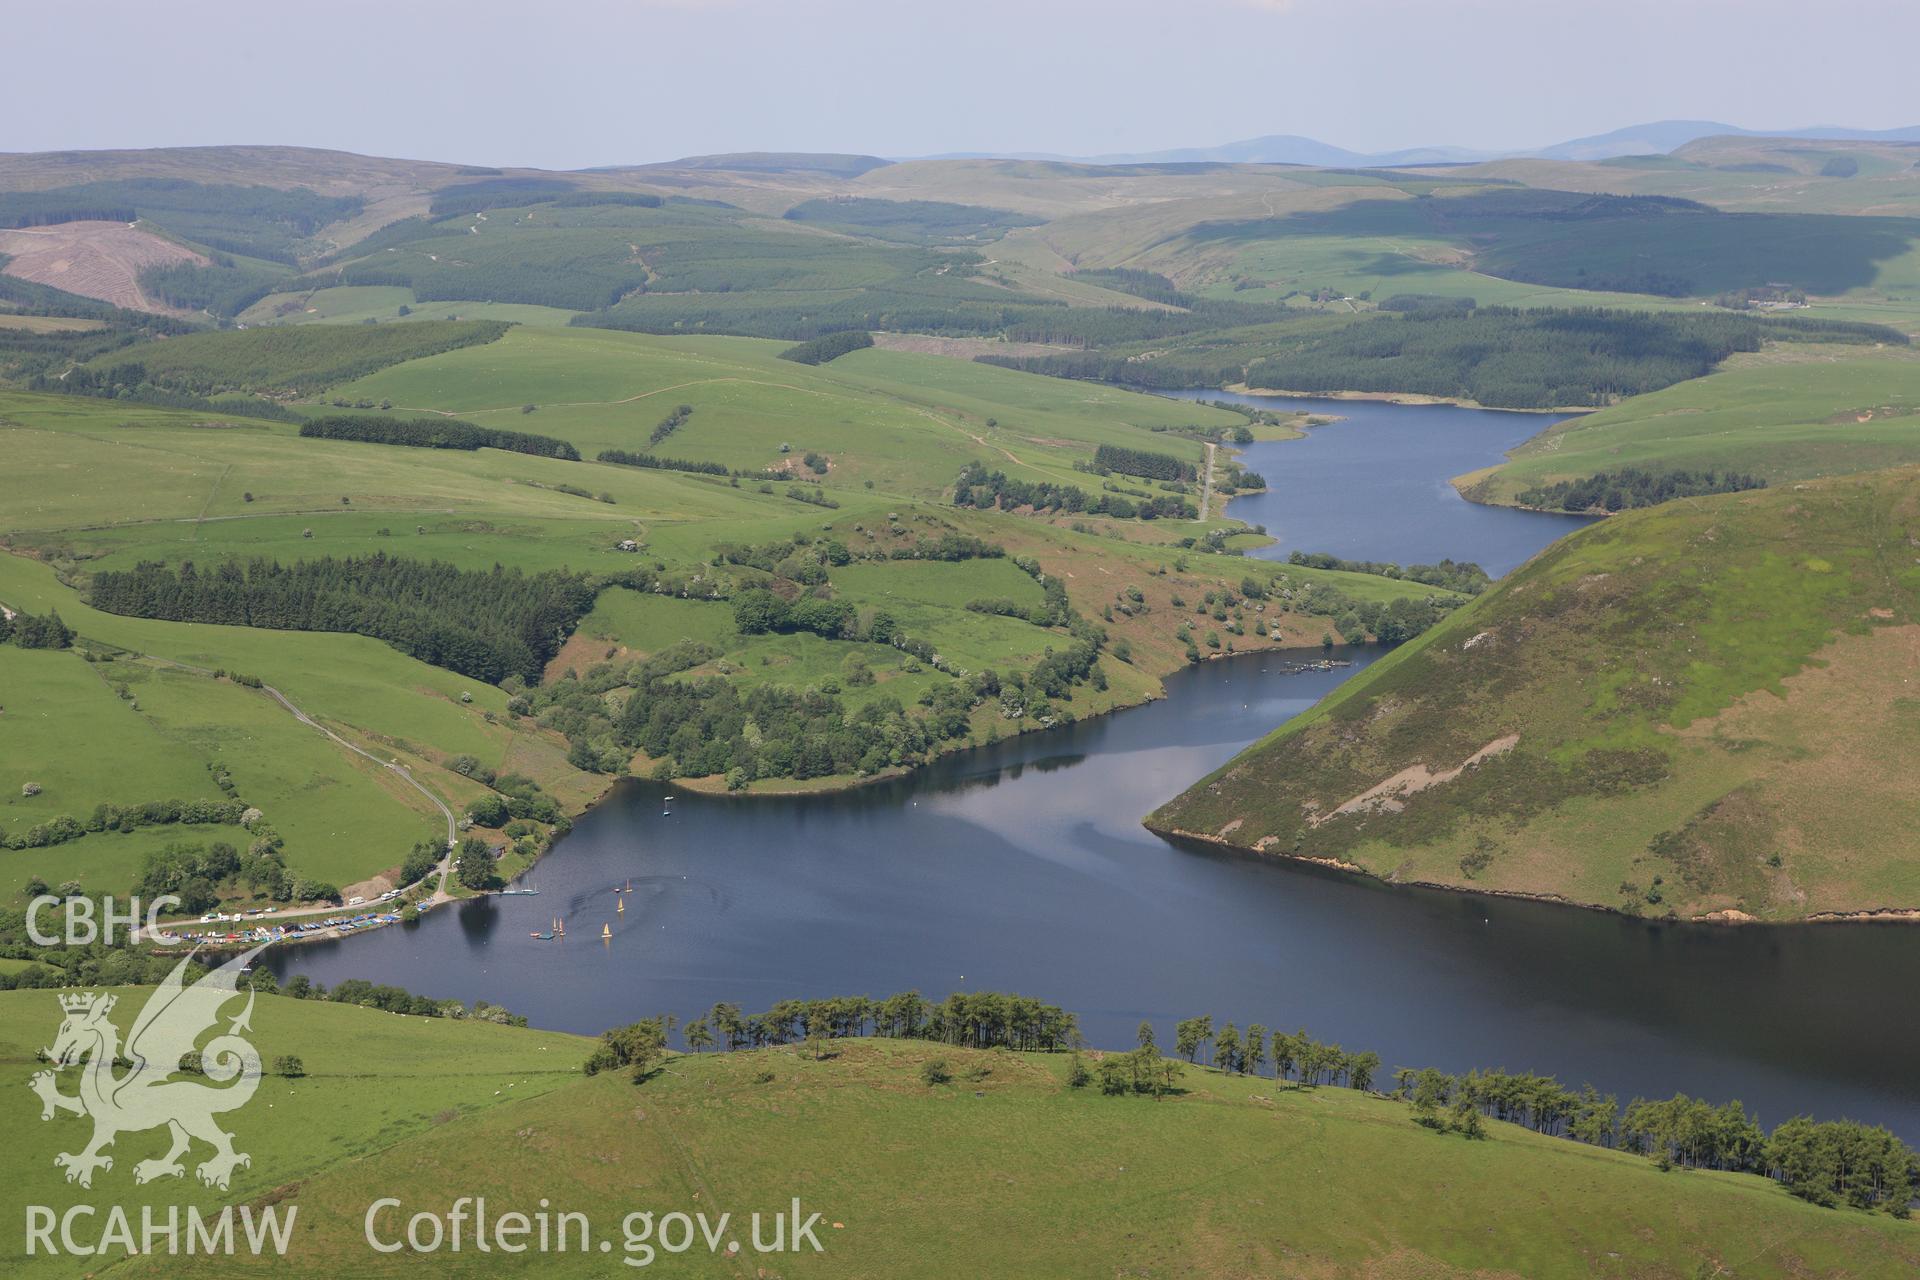 RCAHMW colour oblique aerial photograph of Llyn Clywedog Reservoir, Llanidloes. Taken on 02 June 2009 by Toby Driver